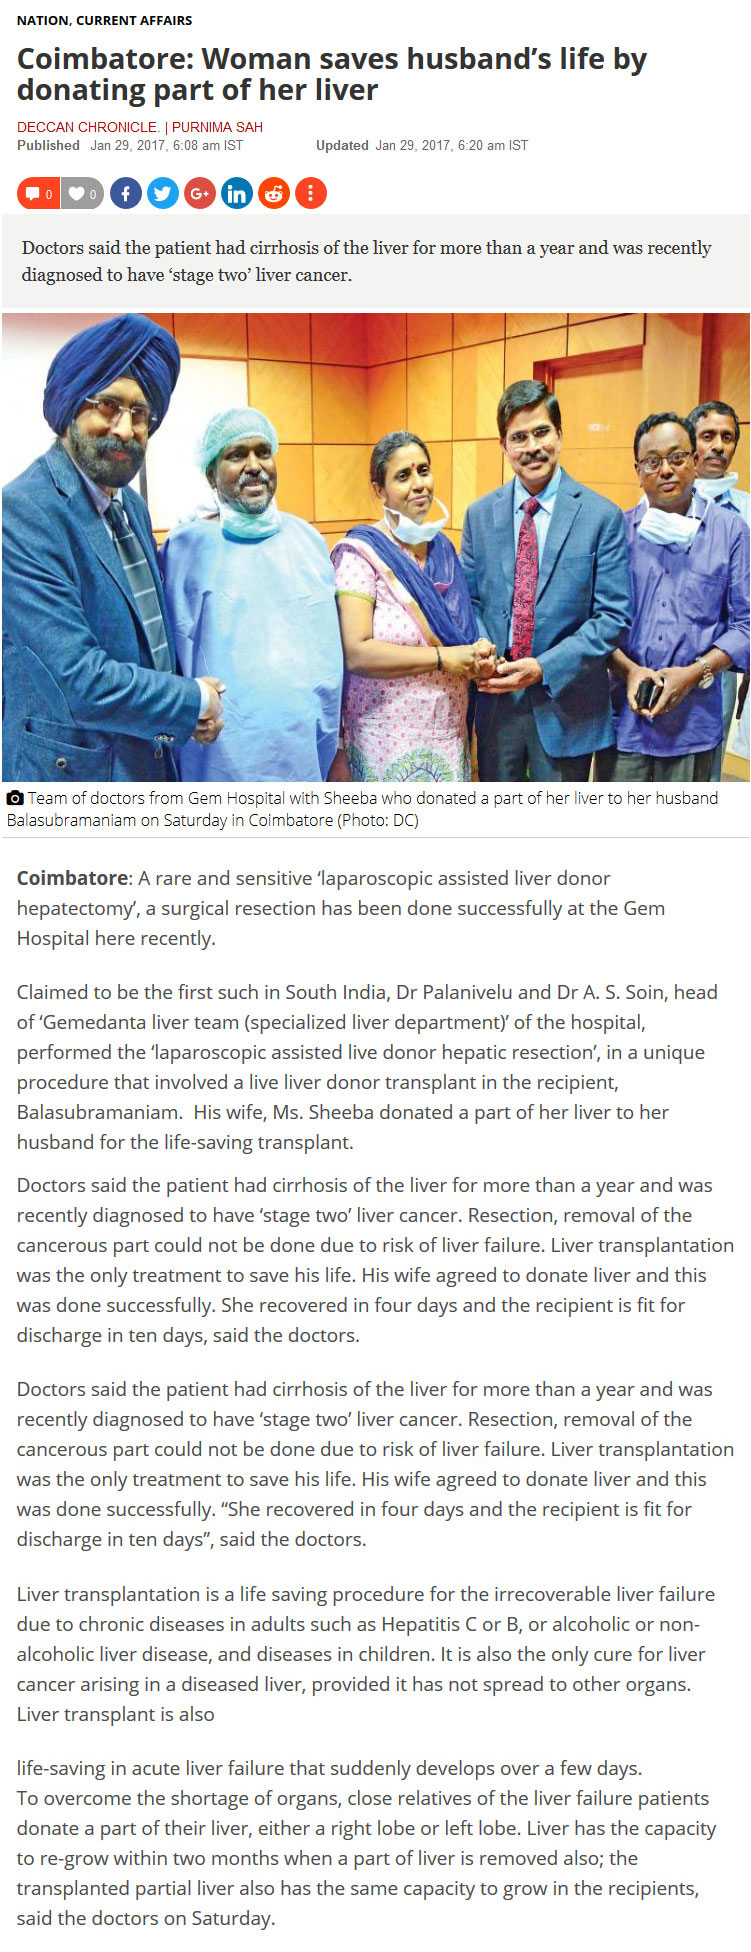 Coimbatore: Woman saves husband's life by donating part of her liver